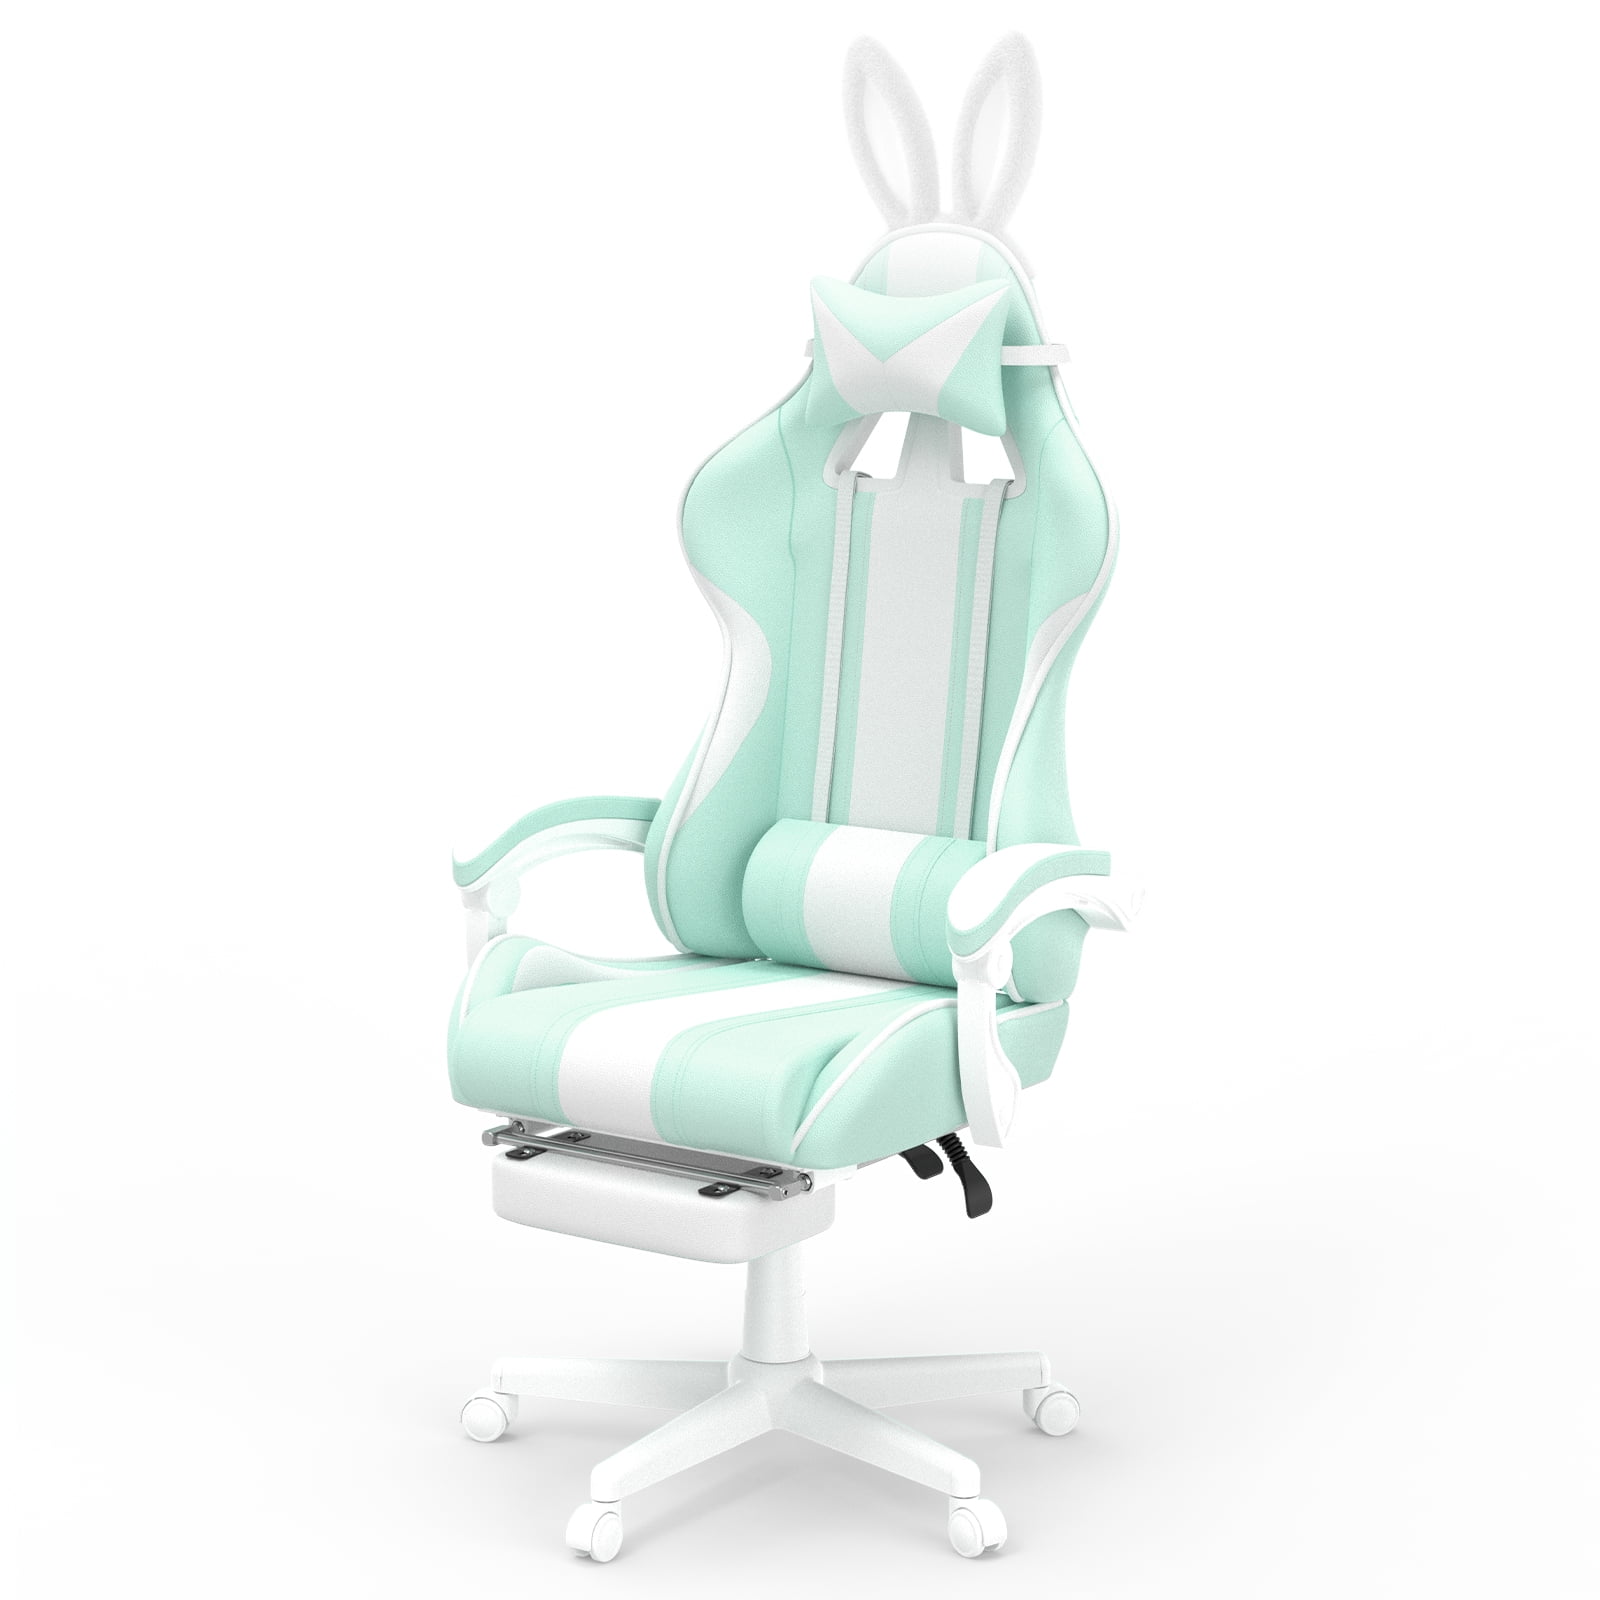 NUOBESTY Office Game Chair for Adults Lumbar Pillow for Couch Plush Desk  Chair Lumbar Support Cushion Bunny Stuffed Animal Back Support Chair Lumbar